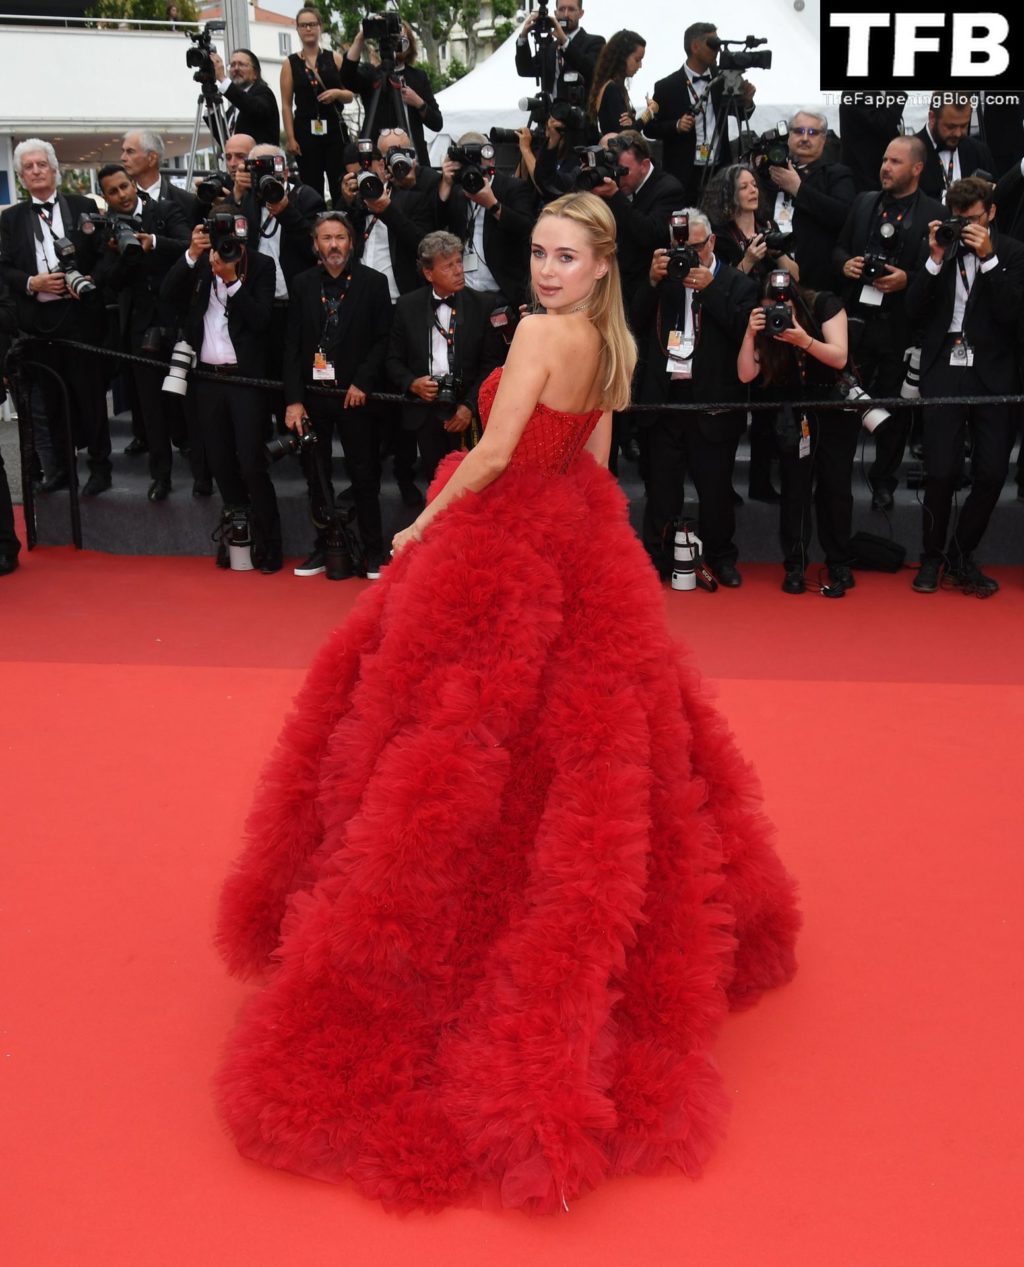 Kimberley Garner Sexy The Fappening Blog 105 1024x1267 - Kimberley Garner Looks Hot in a Red Dress at the 75th Annual Cannes Film Festival (134 Photos)